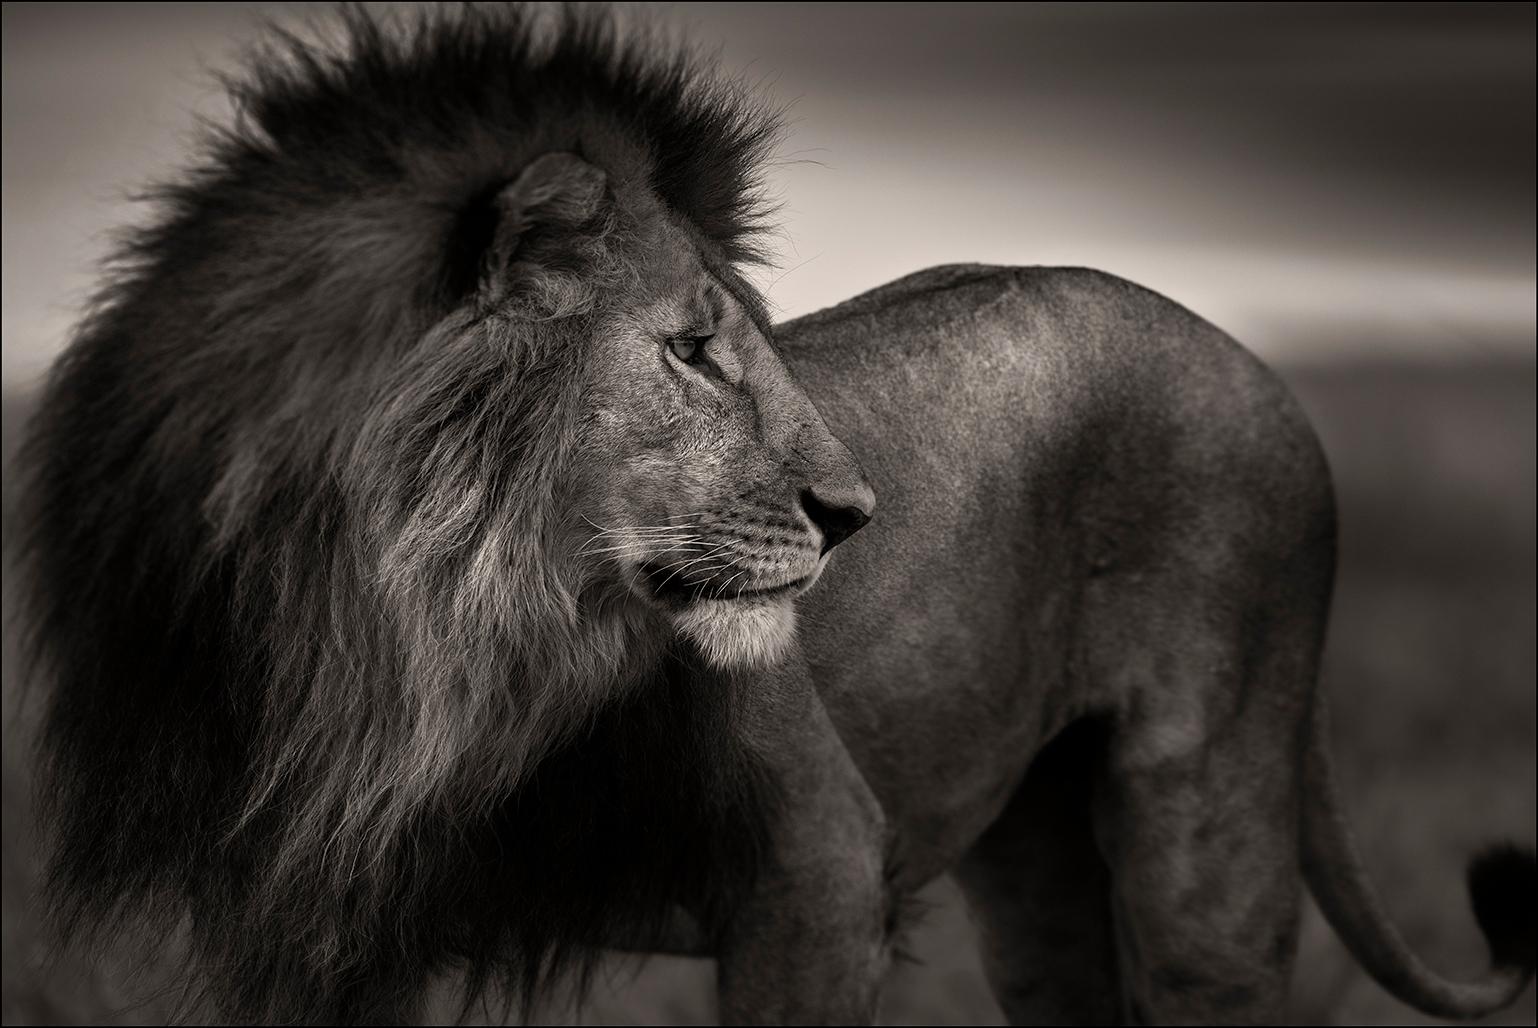 Joachim Schmeisser Black and White Photograph - Lionheart, Lion, animal, wildlife, black and white photography, africa